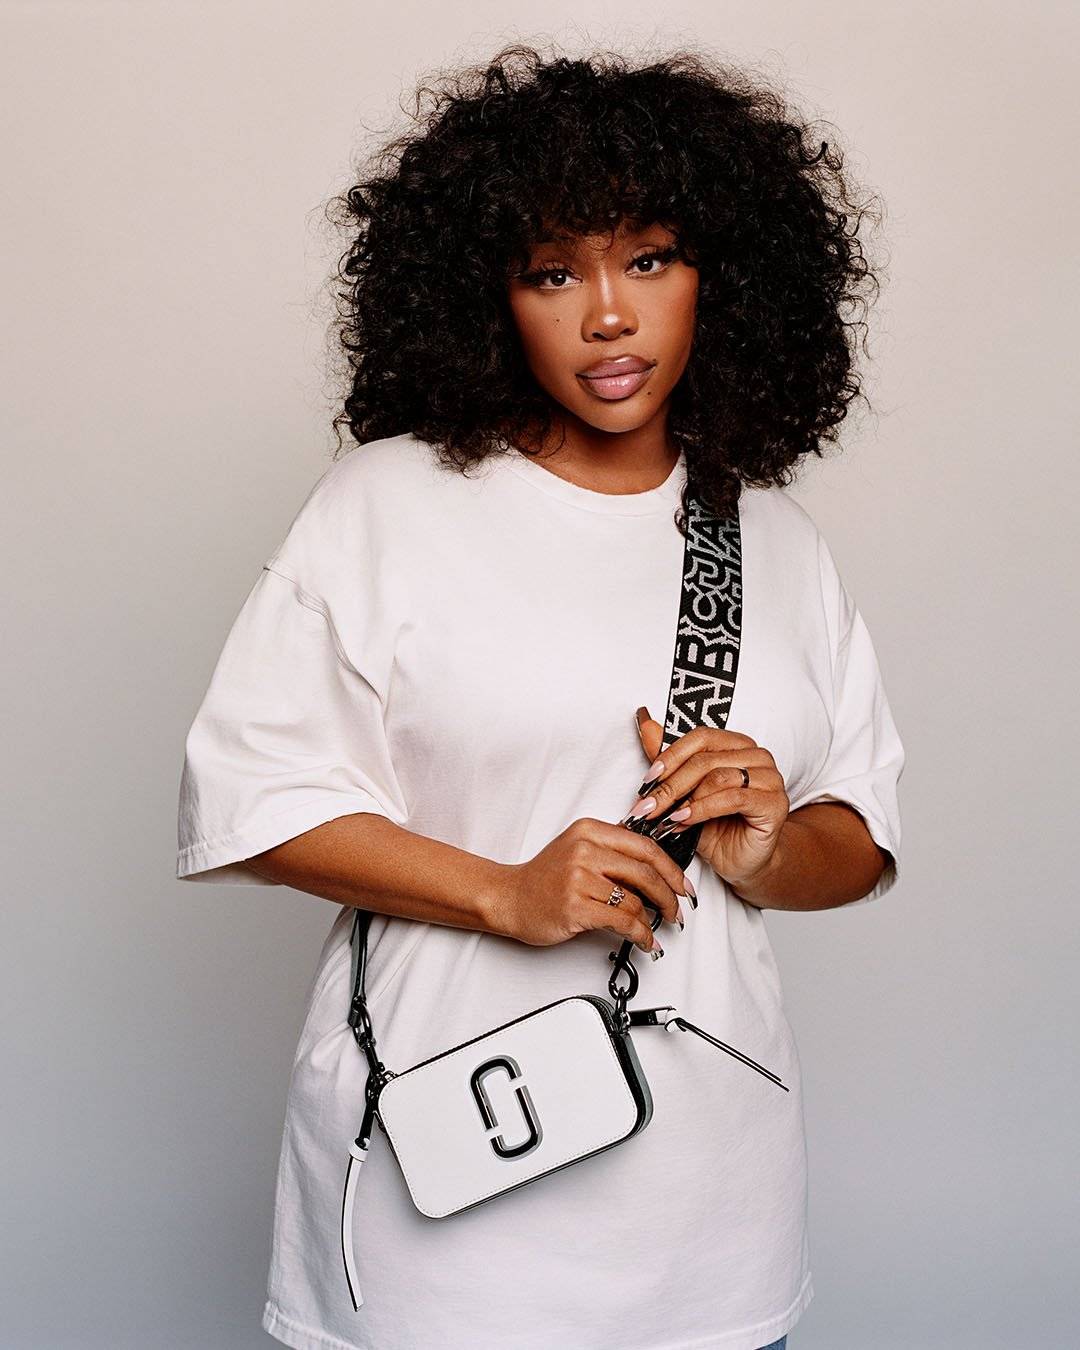 SZA with the Snapshot